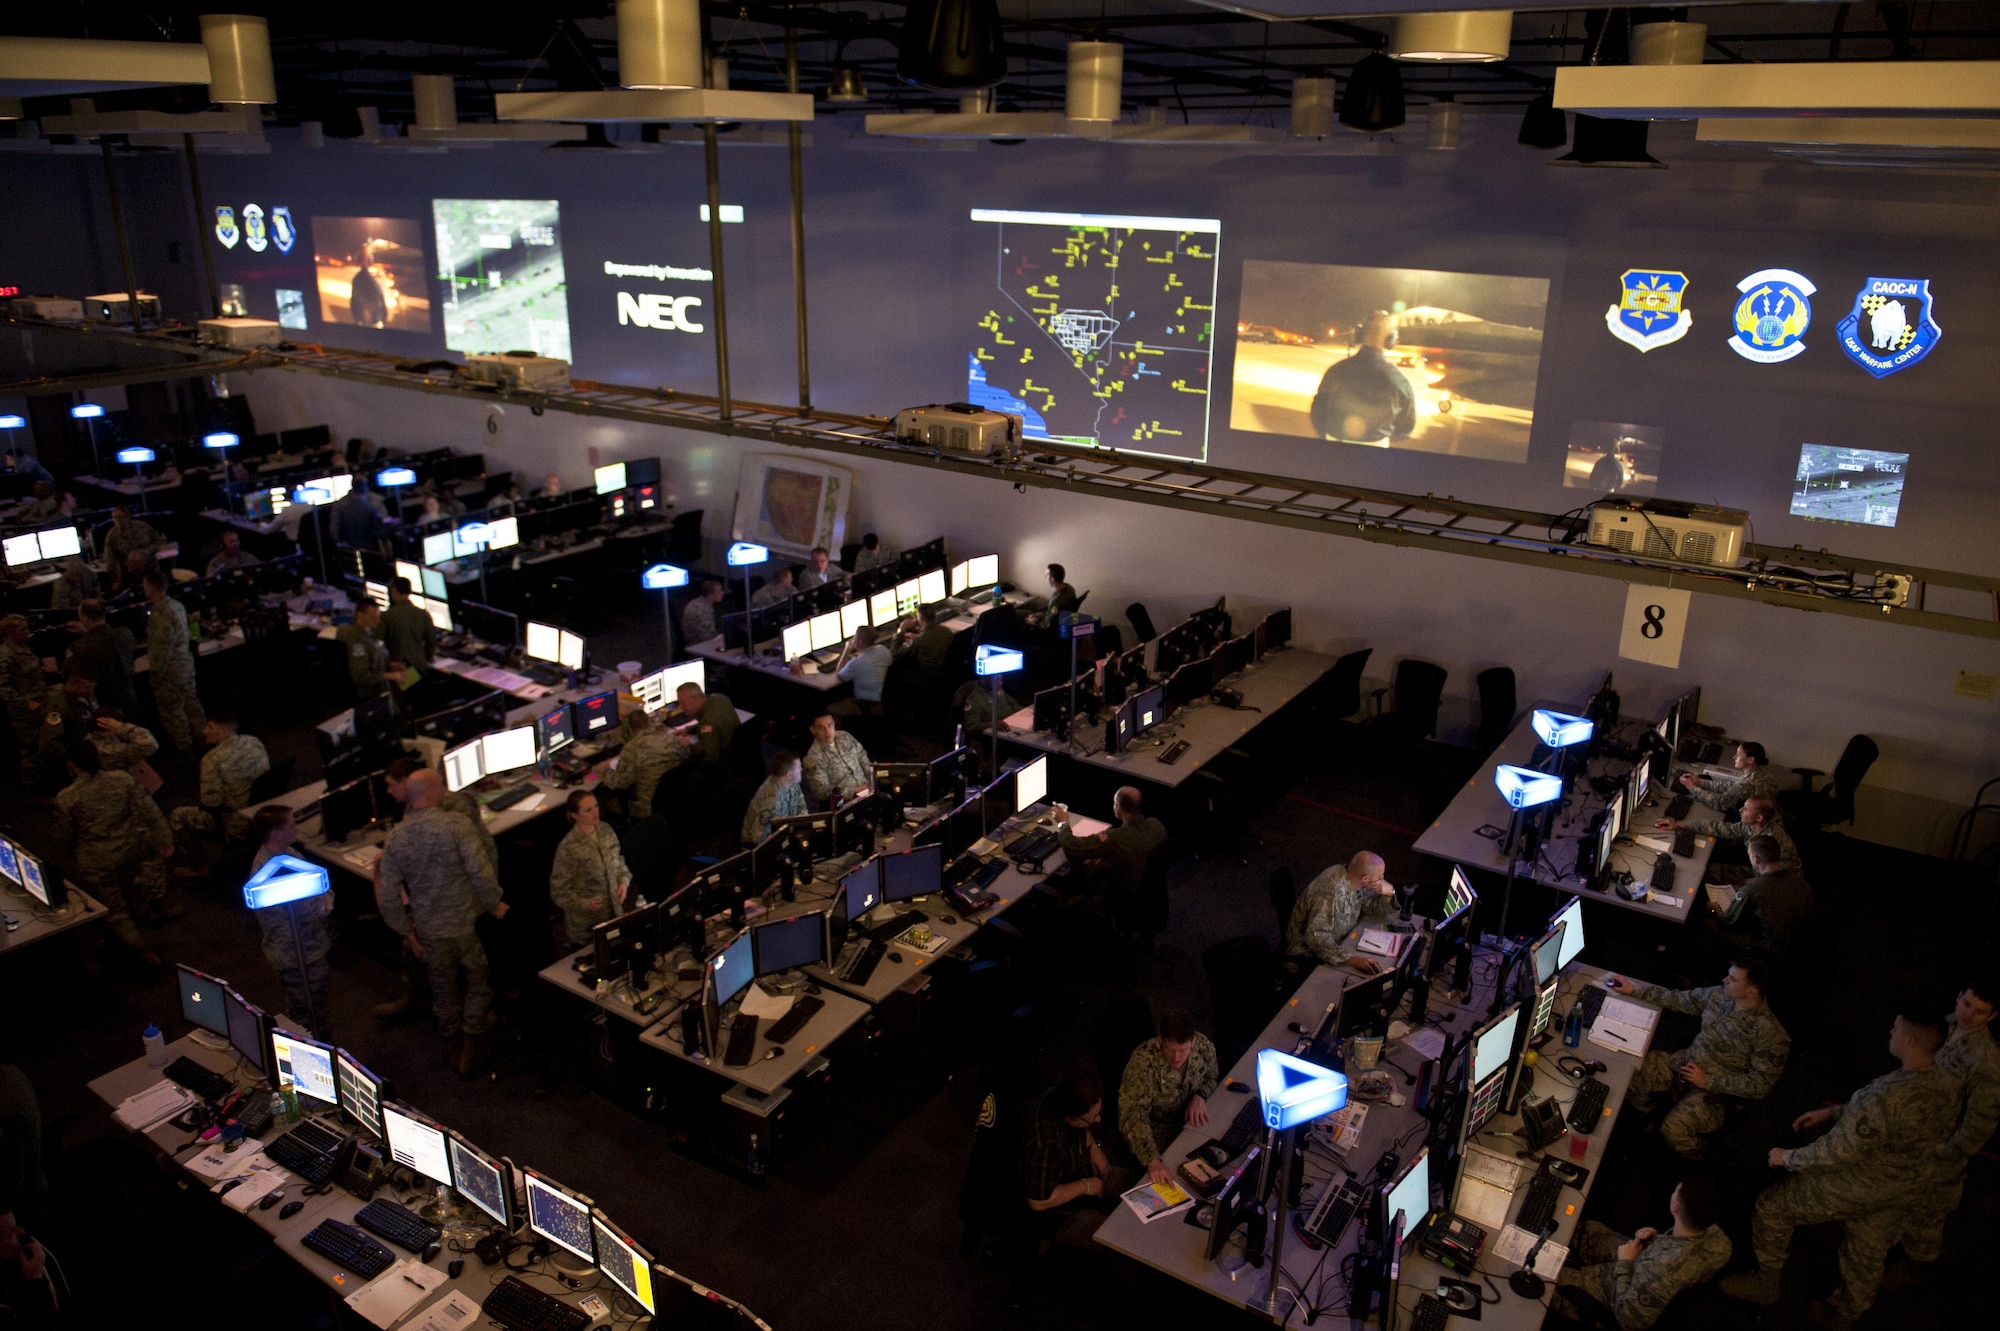 Airmen participate in the live, virtual, constructive portion of Red Flag 15-2 at the Combined Operations Center-Nellis on Nellis Air Force Base, Nev., March 5, 2015. Red Flag 15-2 will be the first Red Flag exercise that will include hundreds of virtual and constructive participants in simulators at their home stations or the Distributed Mission Operations Center at Kirtland Air Force Base, N.M. (U.S. Air Force photo by Senior Airman Thomas Spangler) 